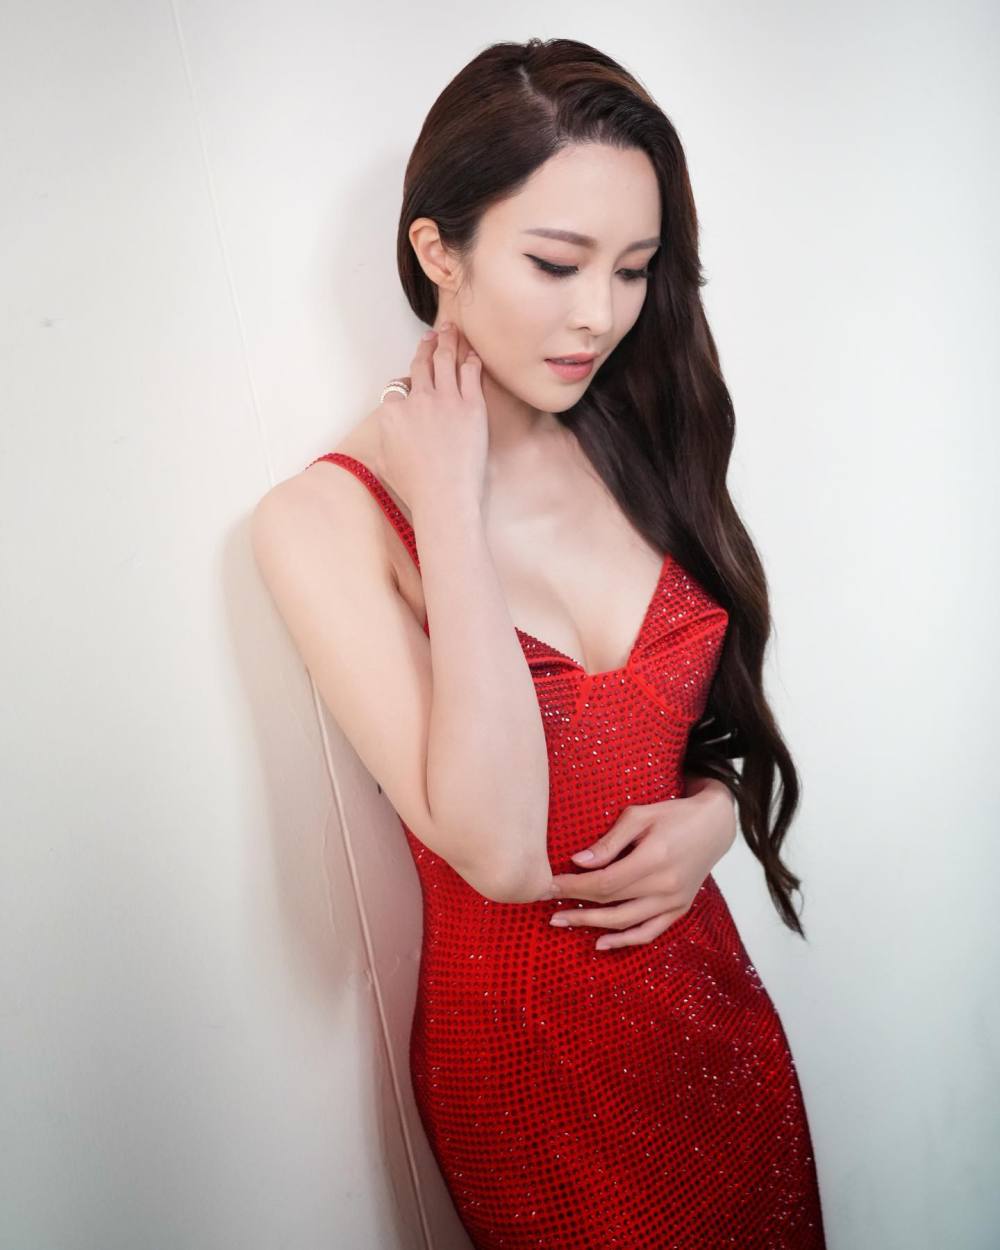 Kelly Cheung Sexy and Hottest Photos , Latest Pics